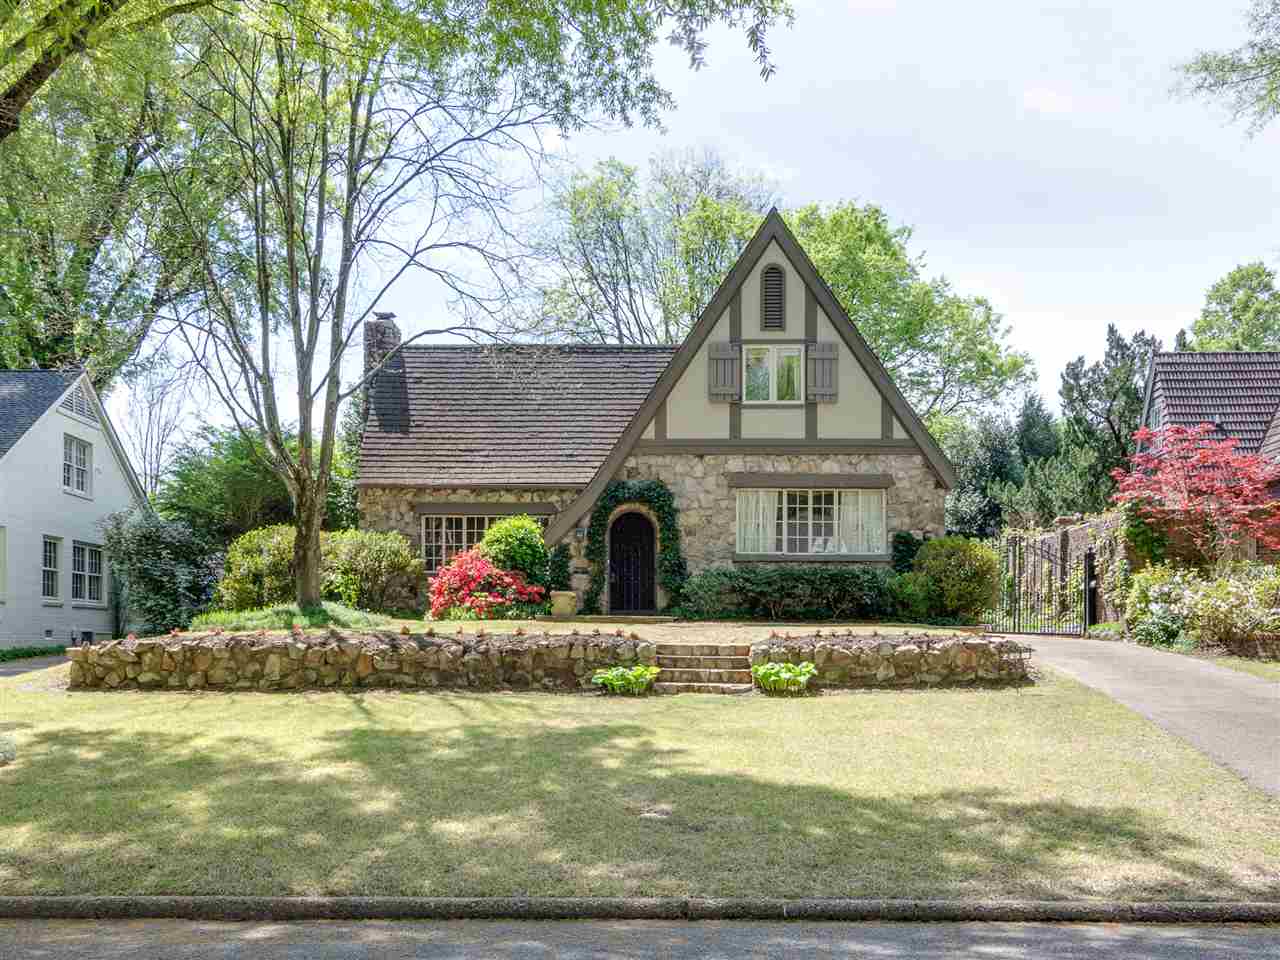 Enchanting English architecture in the heart of Chickasaw Gardens!